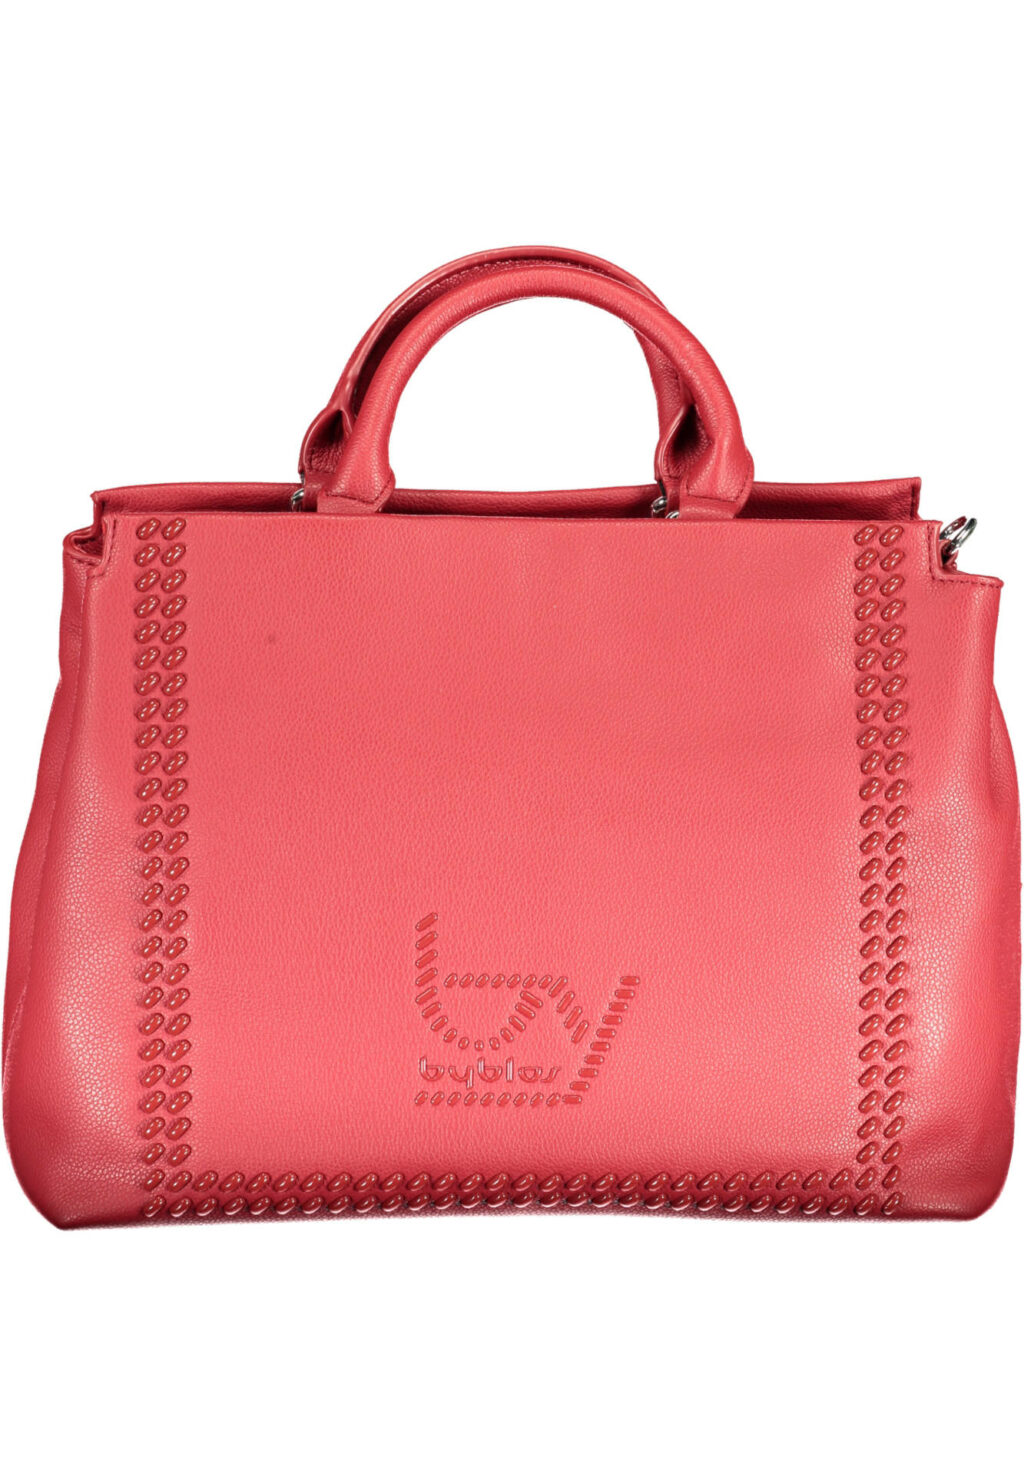 BYBLOS RED WOMEN'S BAG 20100107_ROSSO_333-RED